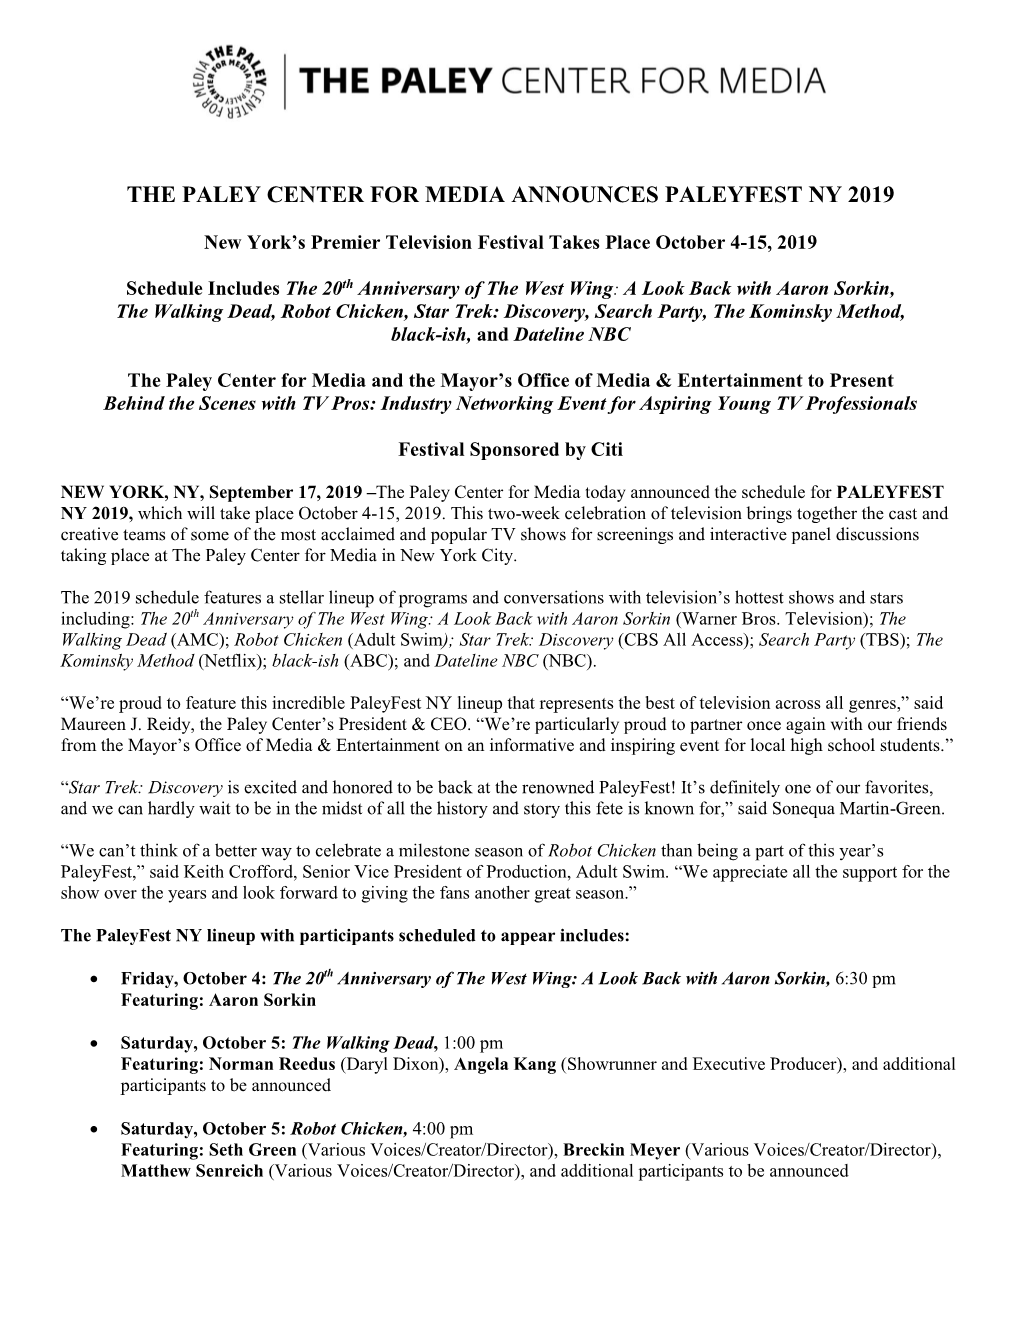 The Paley Center for Media Announces Paleyfest Ny 2019